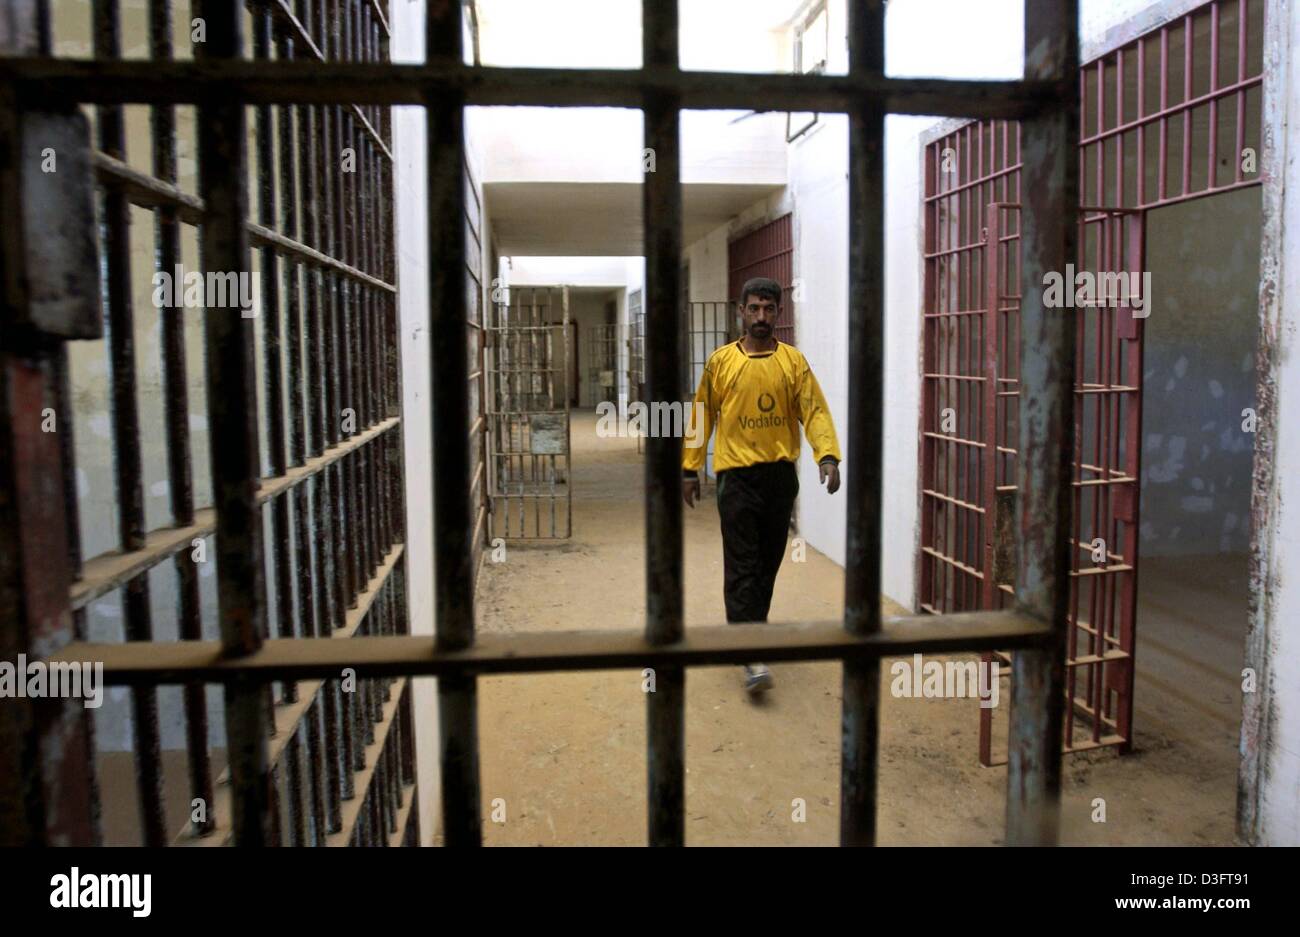 (dpa) -  A man walks along a corridor past rows of prison cells in the infamous Iraqi state security prison Abu Ghraib around 30 kilometres west of Baghdad, Iraq, 2 May 2003. Thousands of political prisoners had been tortured and executed in the prison. Stock Photo